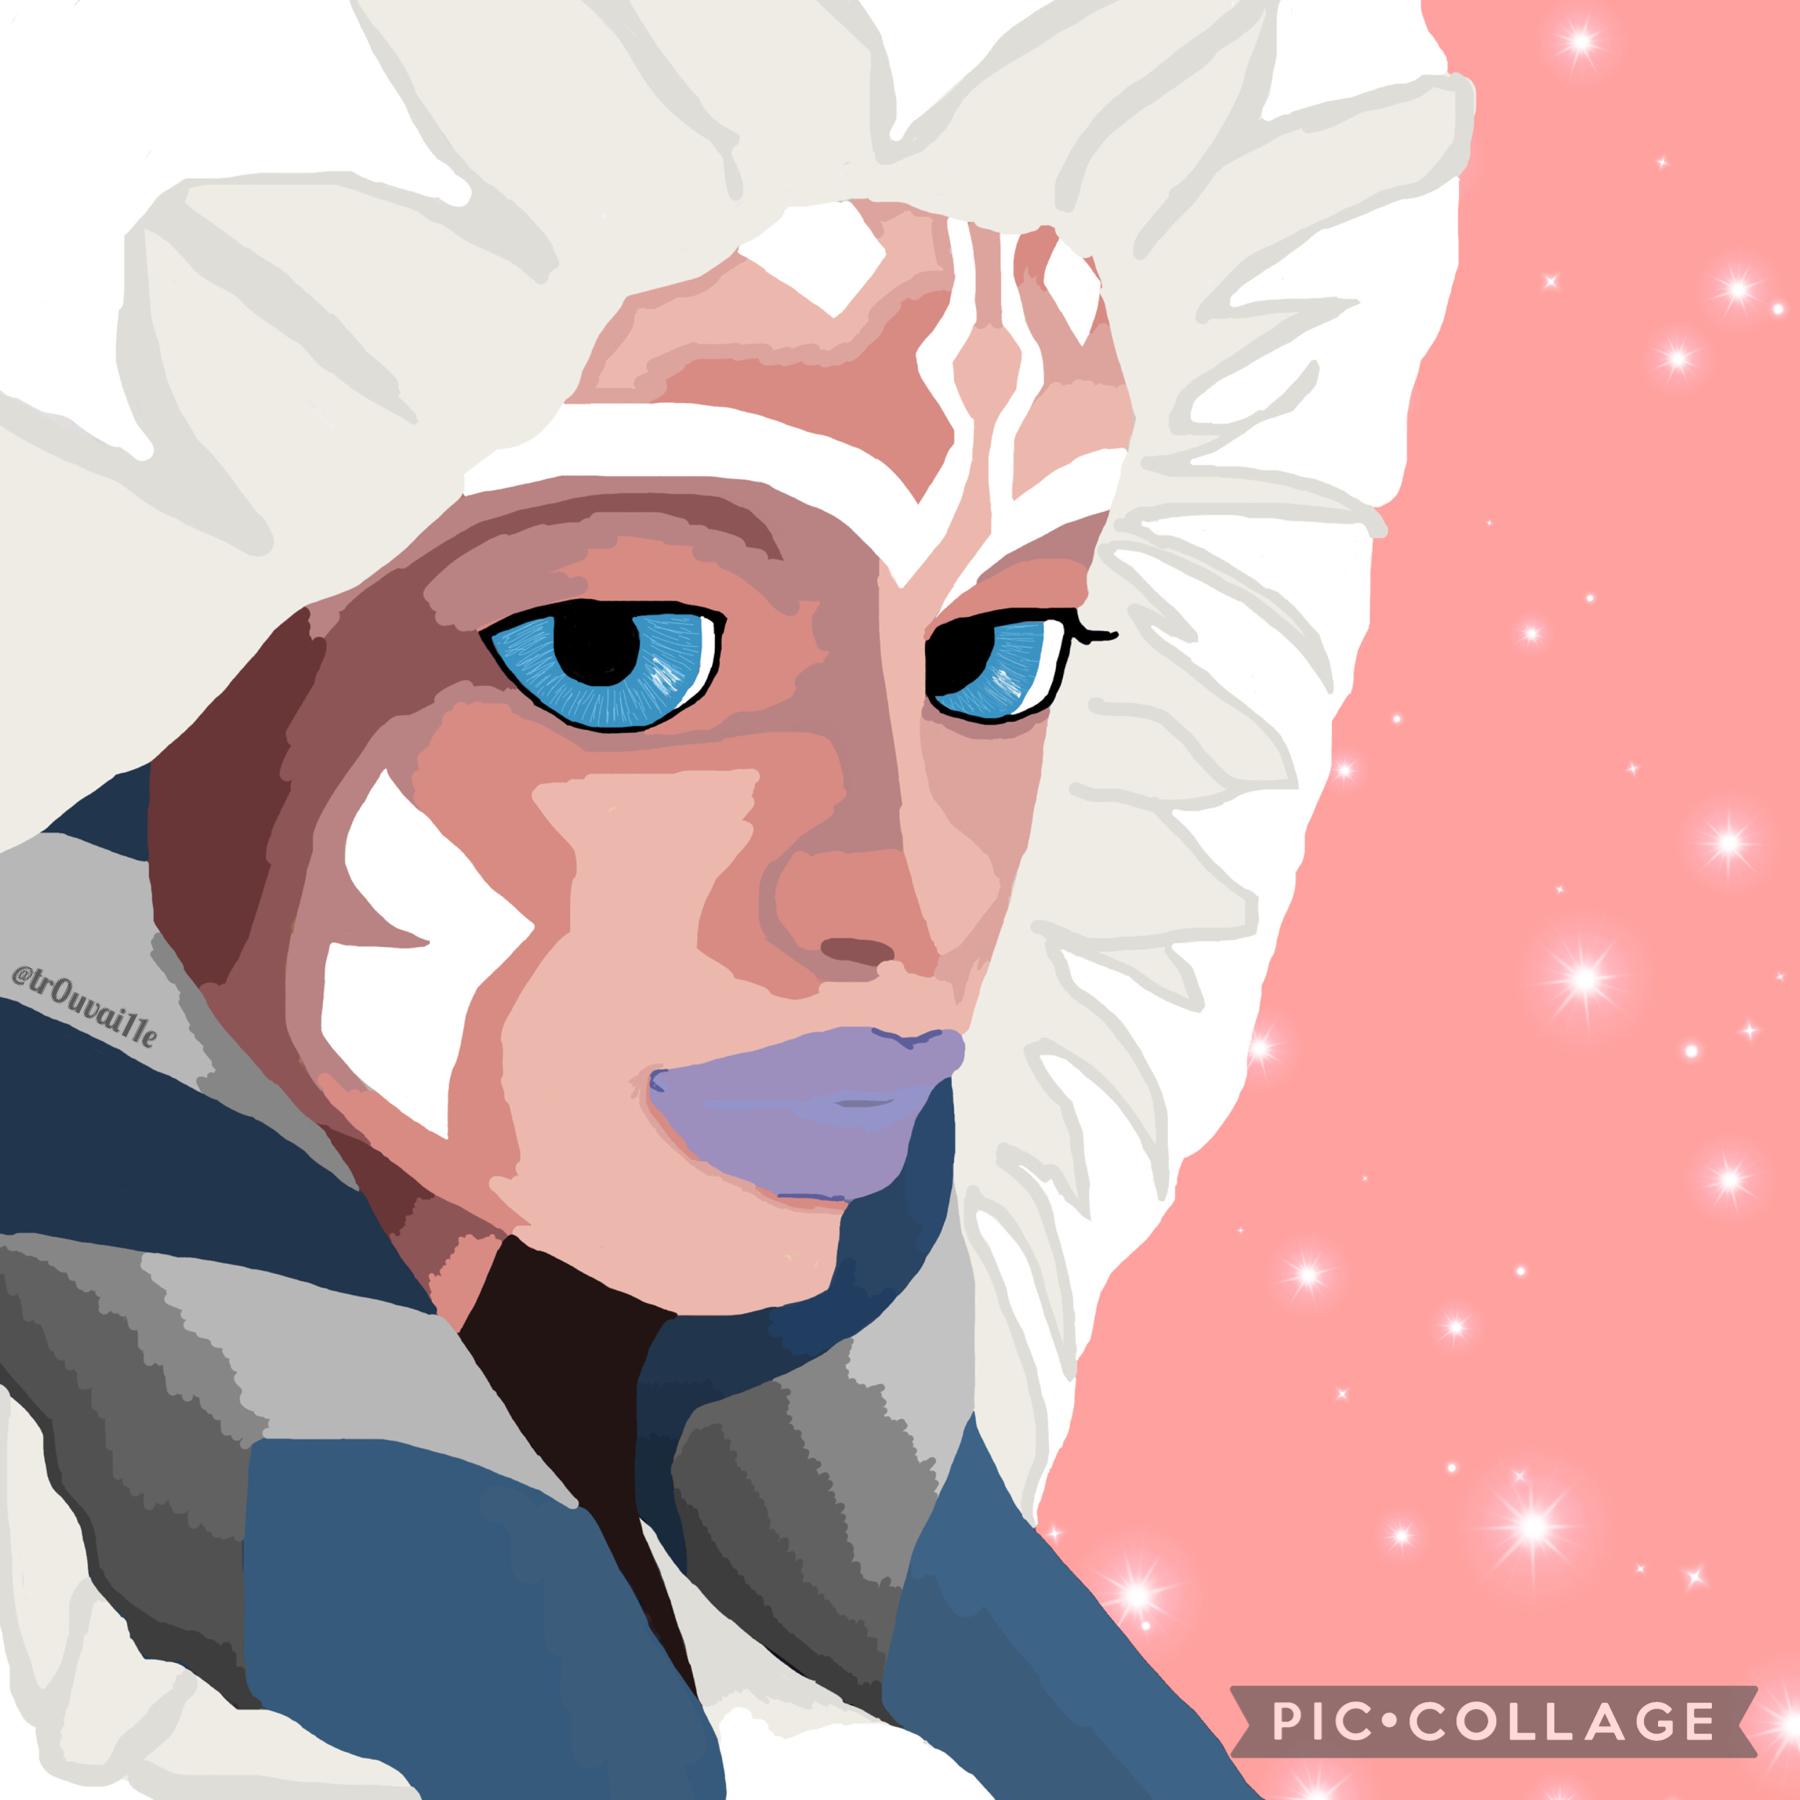 So some of you wanted to see my fanart, here’s a digital drawing of Ahsoka that I did a while ago :)